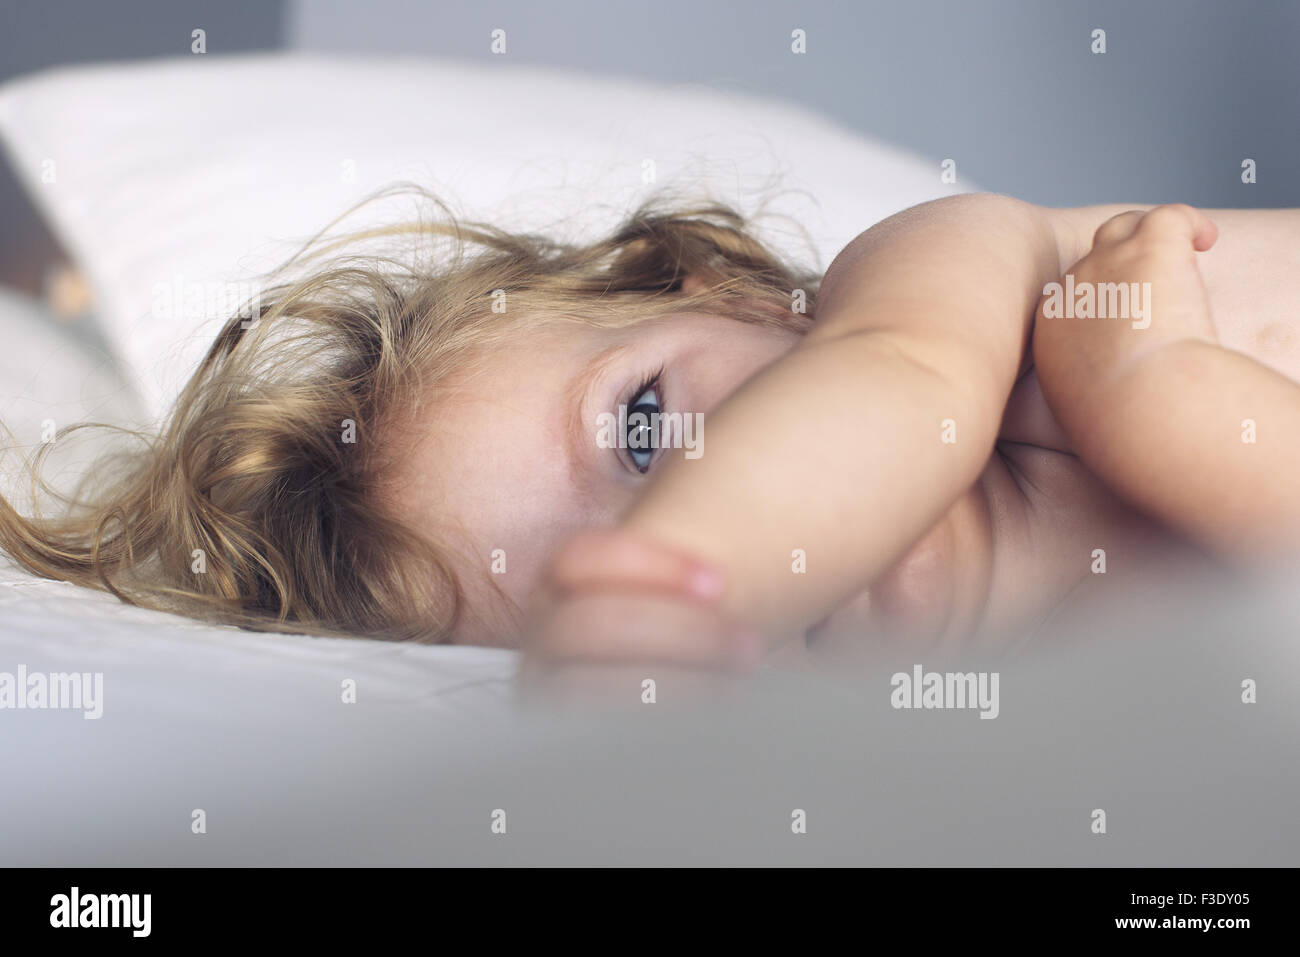 Baby girl napping Foto Stock